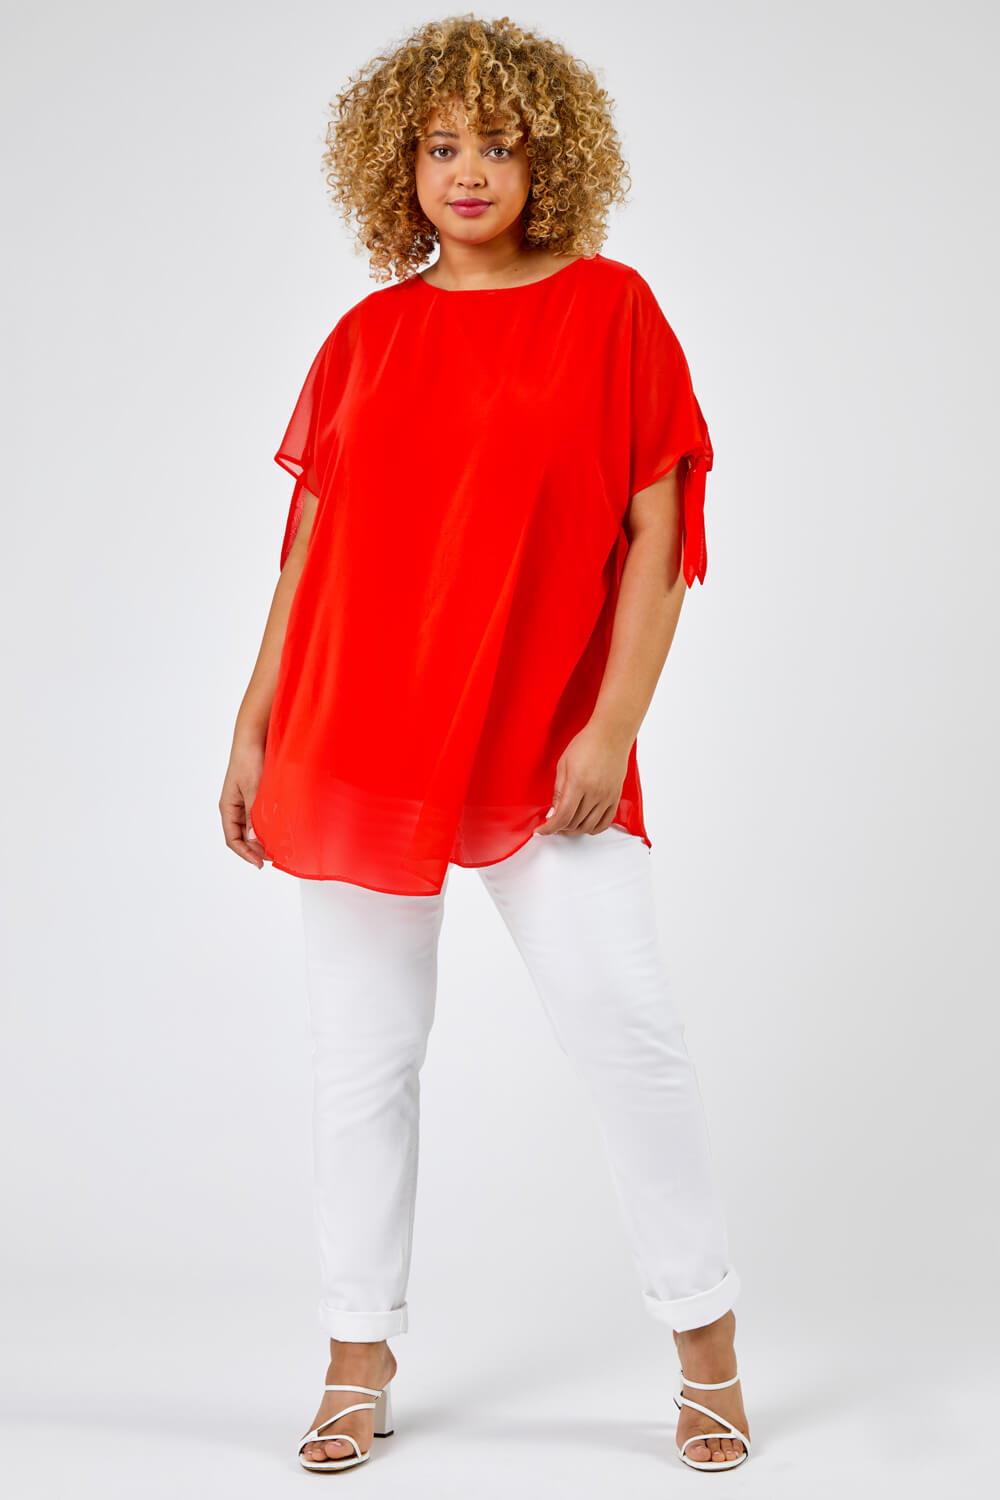 CORAL Curve Chiffon Overlay Top With Necklace, Image 3 of 5